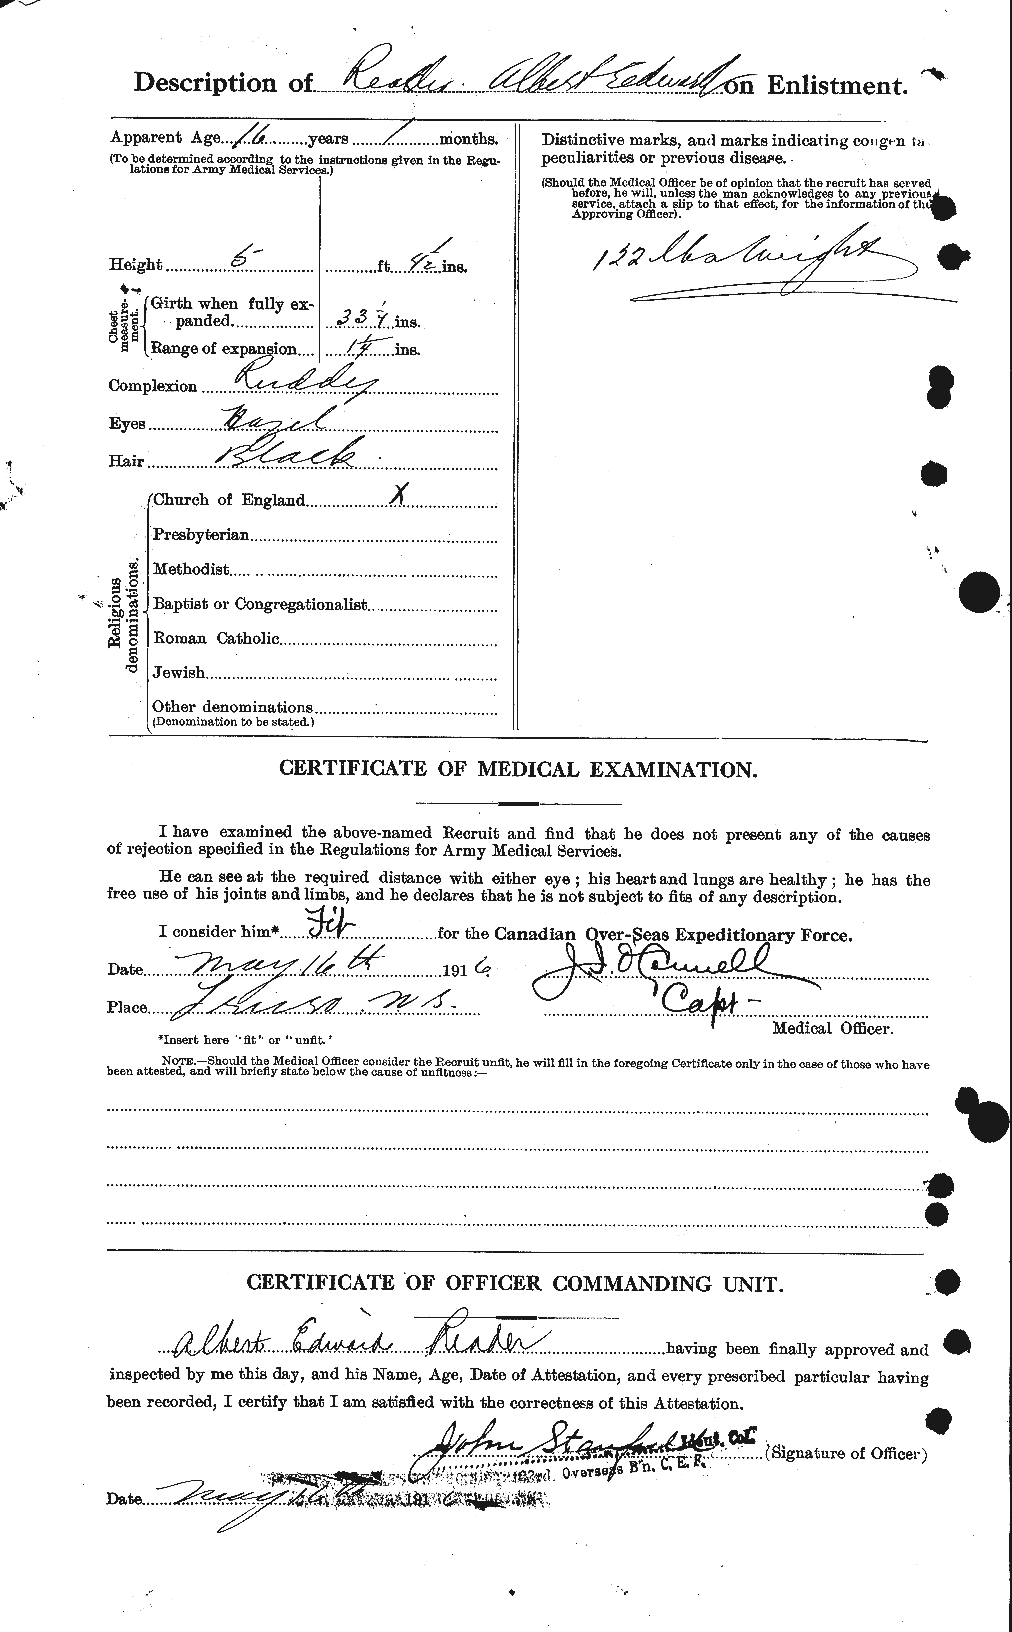 Personnel Records of the First World War - CEF 598381b